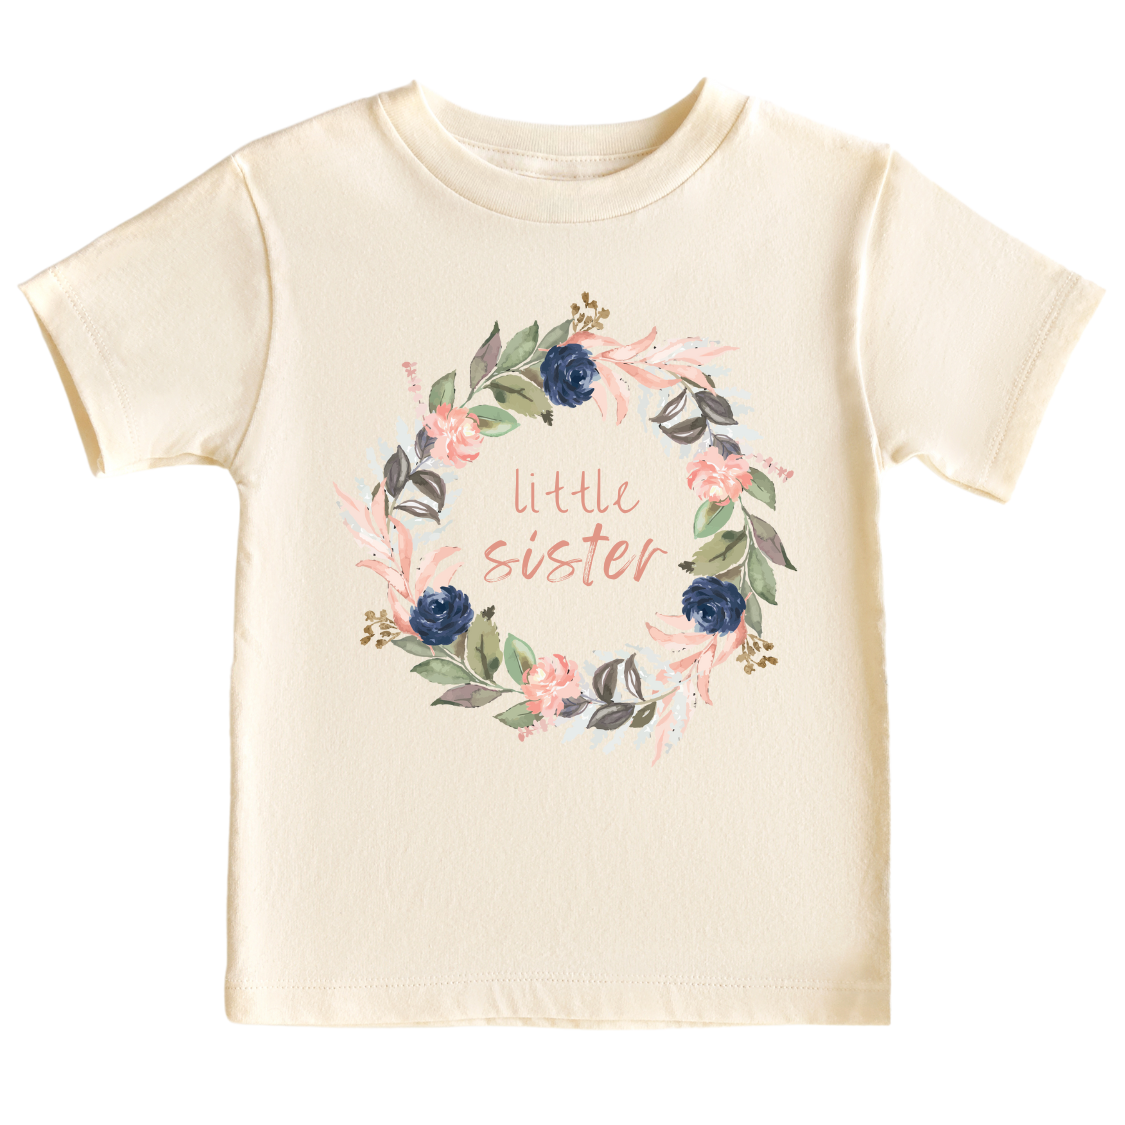 Natural kid's t-shirt with a cute printed graphic of a floral wreath and the text 'Little Sister.' This adorable t-shirt celebrates the arrival of a precious little sister.